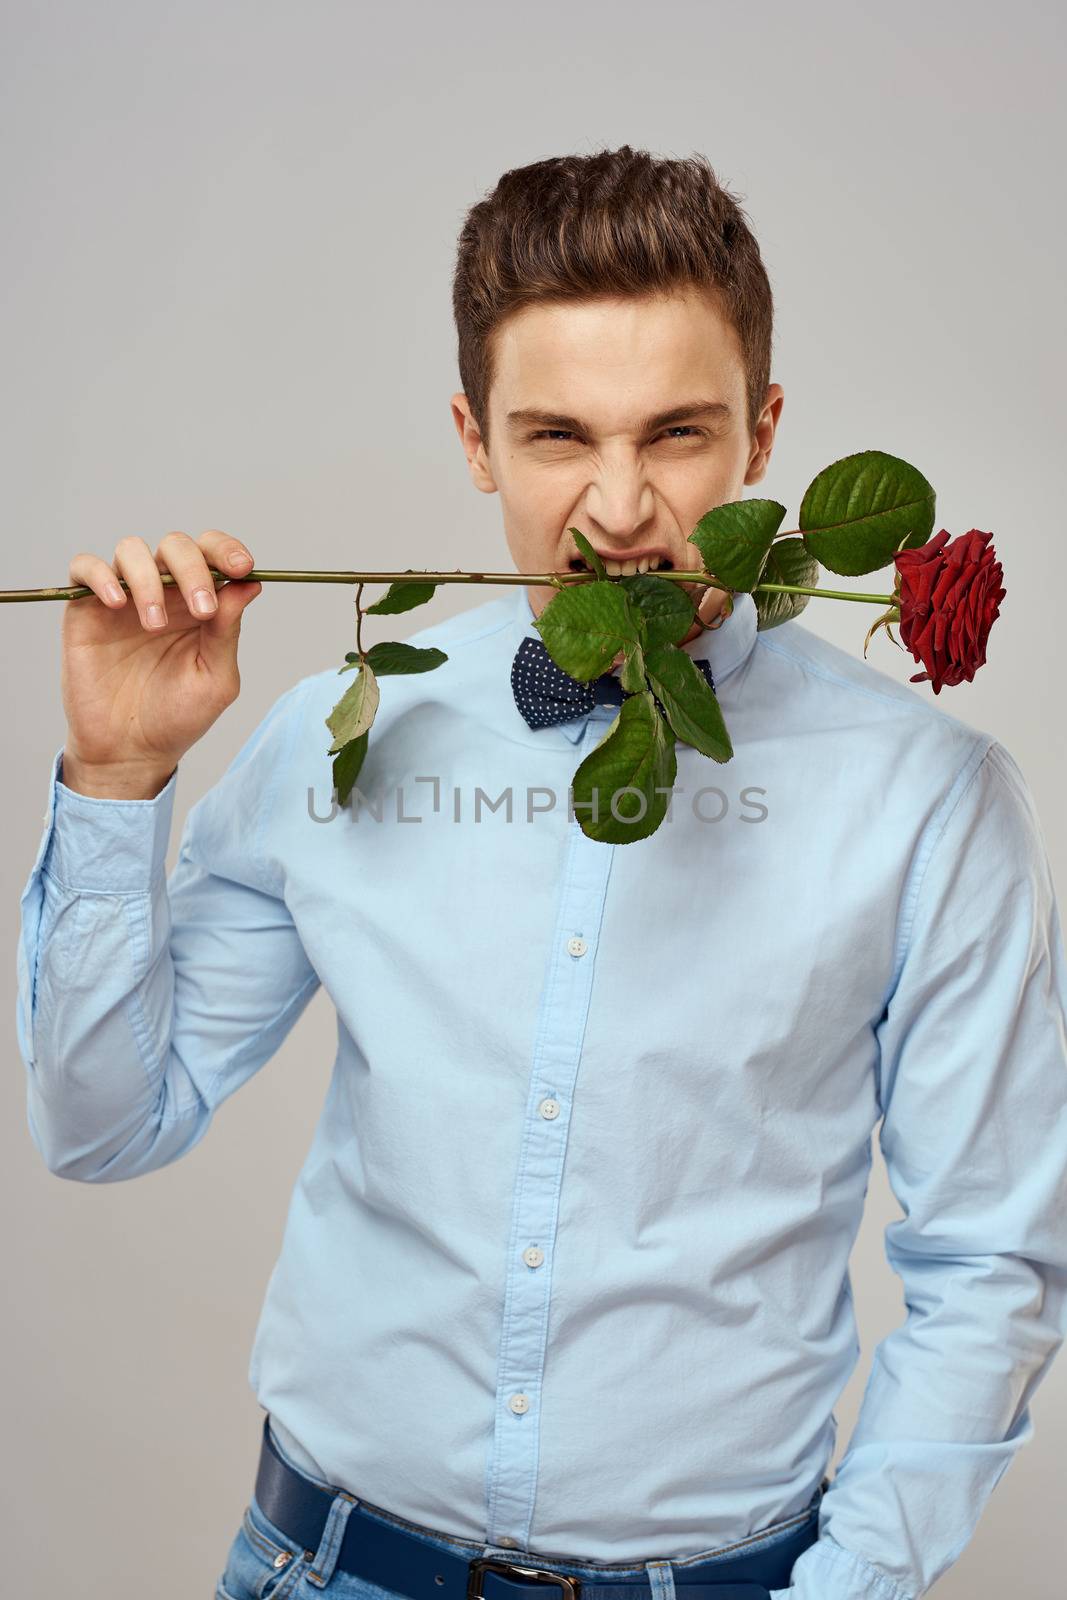 Romantic man with a red rose and in a blue shirt with a bow tie around his neck gray background by SHOTPRIME